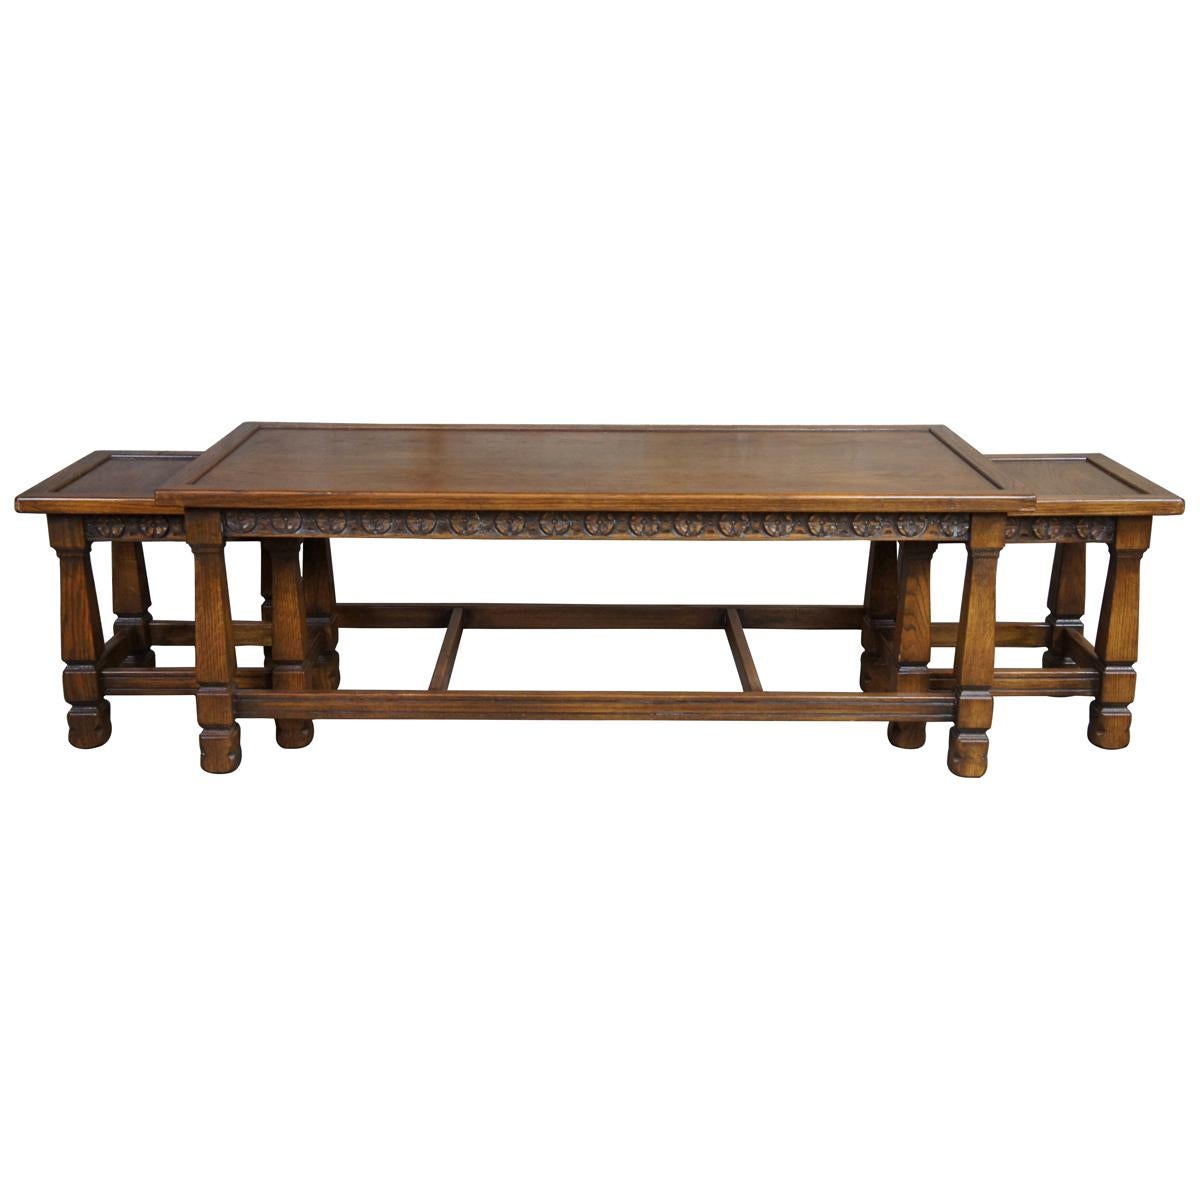 Romweber Viking oak nesting coffee table, circa 1960s. Made from solid oak with a carved apron over square tapered legs connected by jointed stretchers.

Romweber's roots go back to 1879 in Batesville, Indiana. One of the nations oldest case good